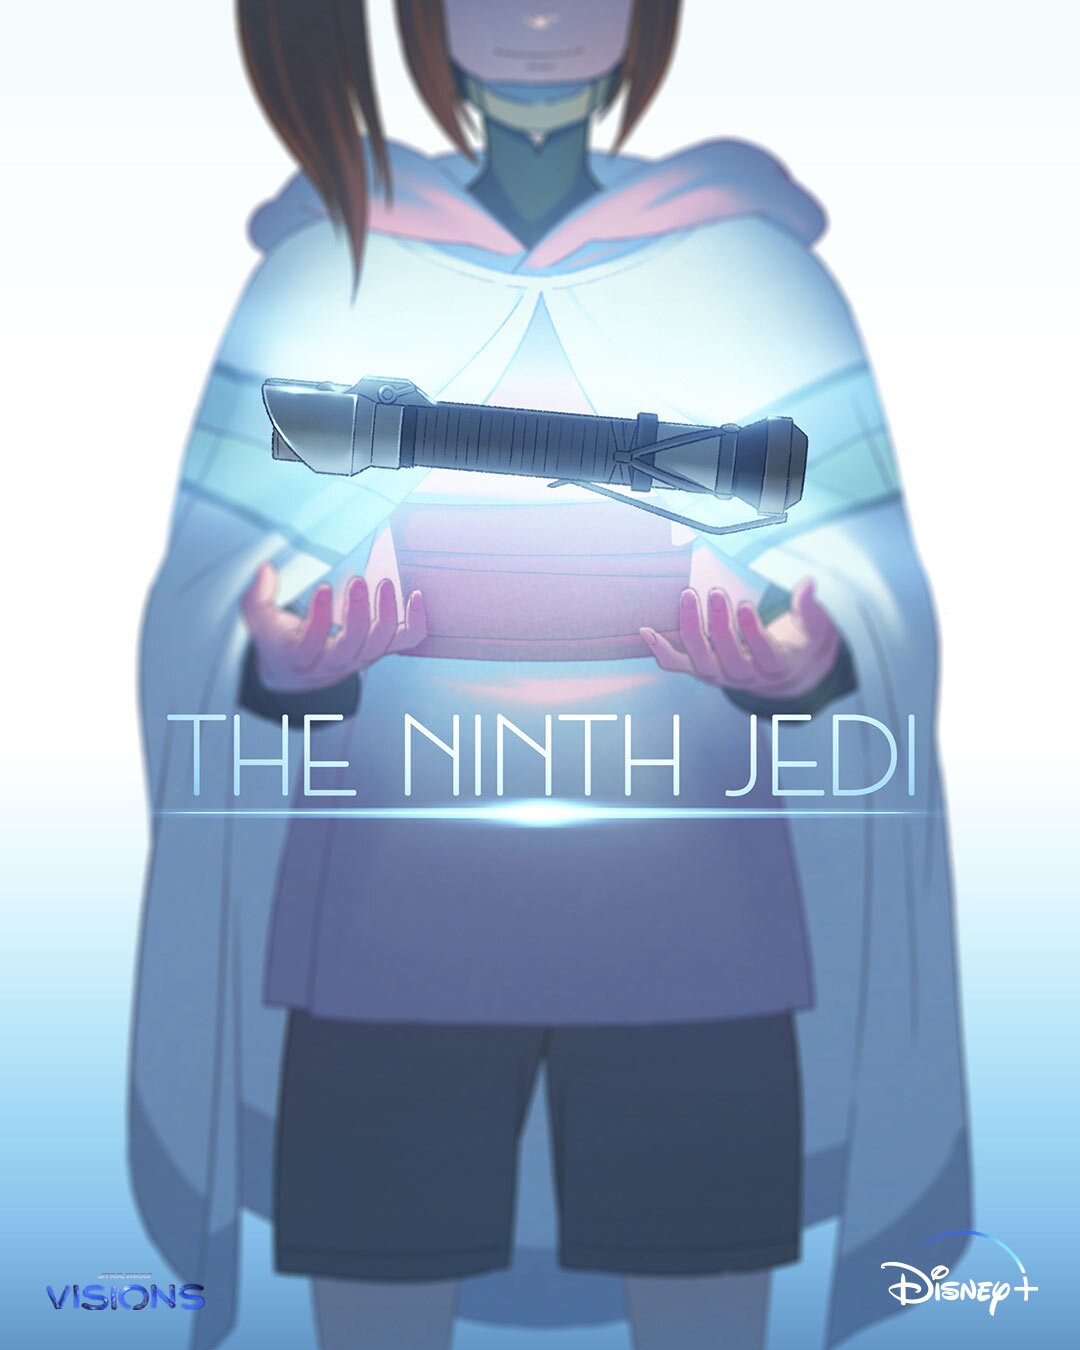 "The Ninth Jedi" from Production I.G